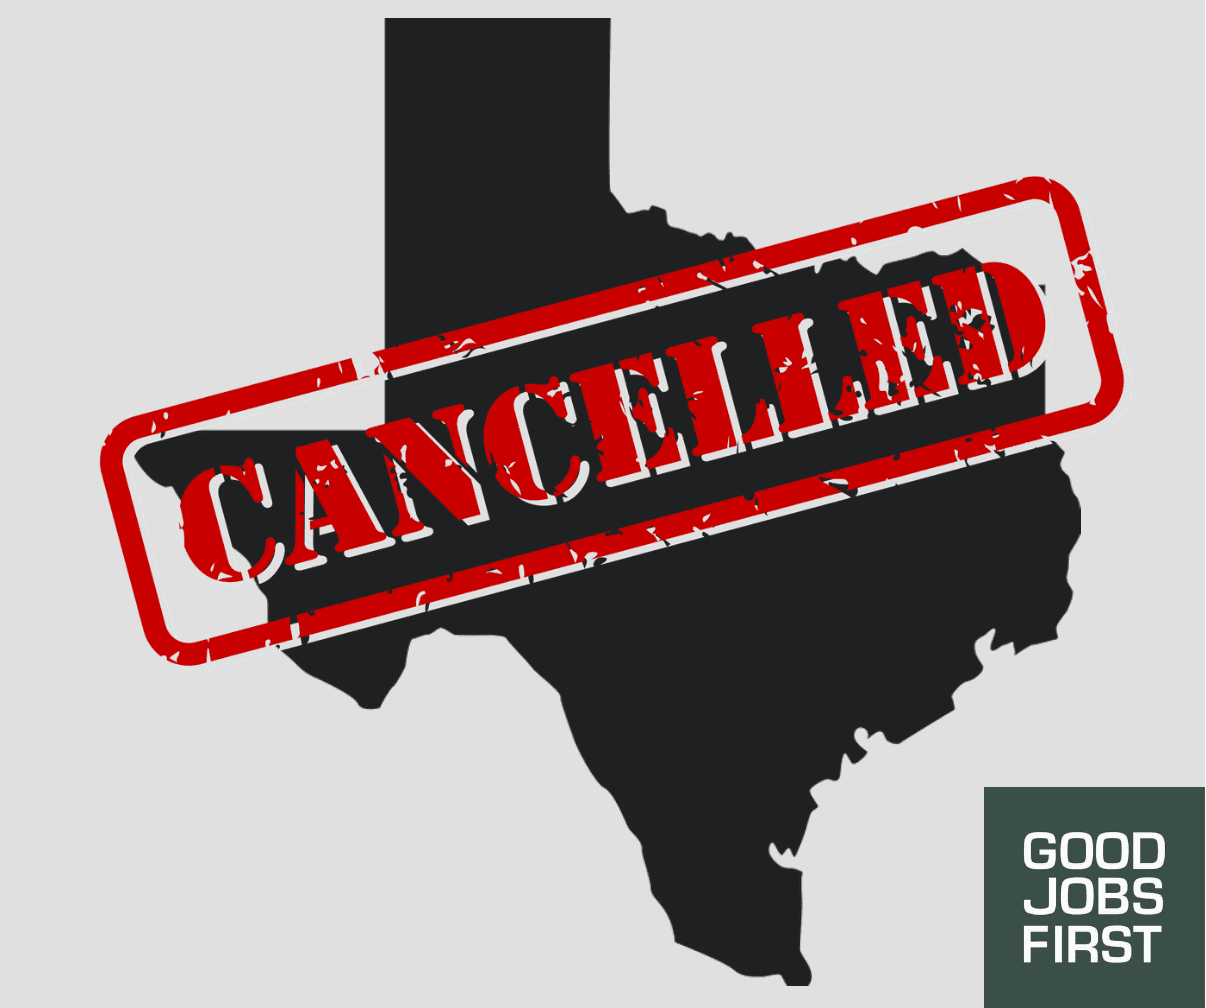 Image of Texas state with the word "Cancelled" in a red stamp and the Good Jobs First logo, which is a green square box and white text.